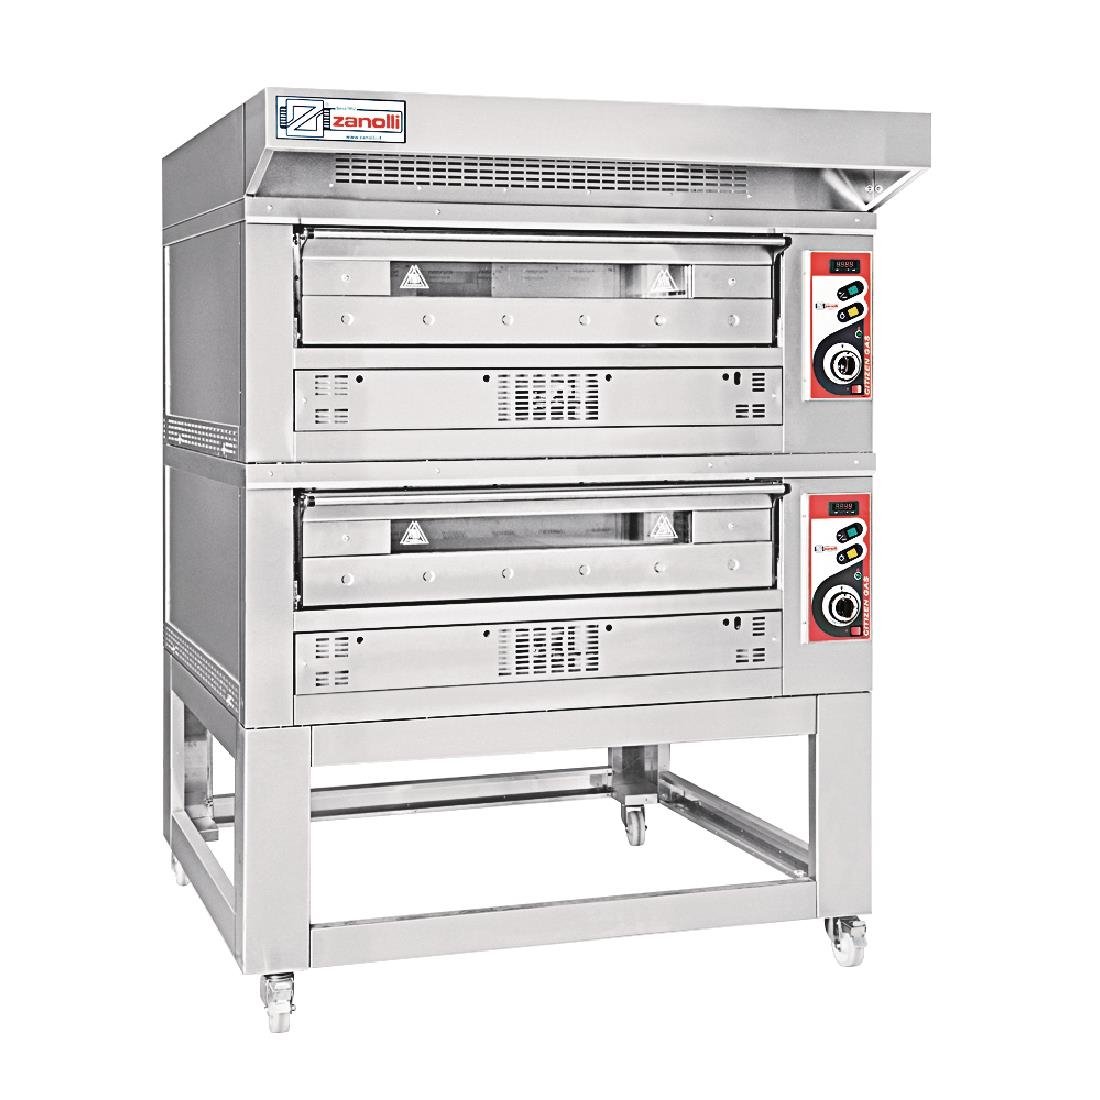 FC746 Stand for Citizen 9 Pizza Oven JD Catering Equipment Solutions Ltd